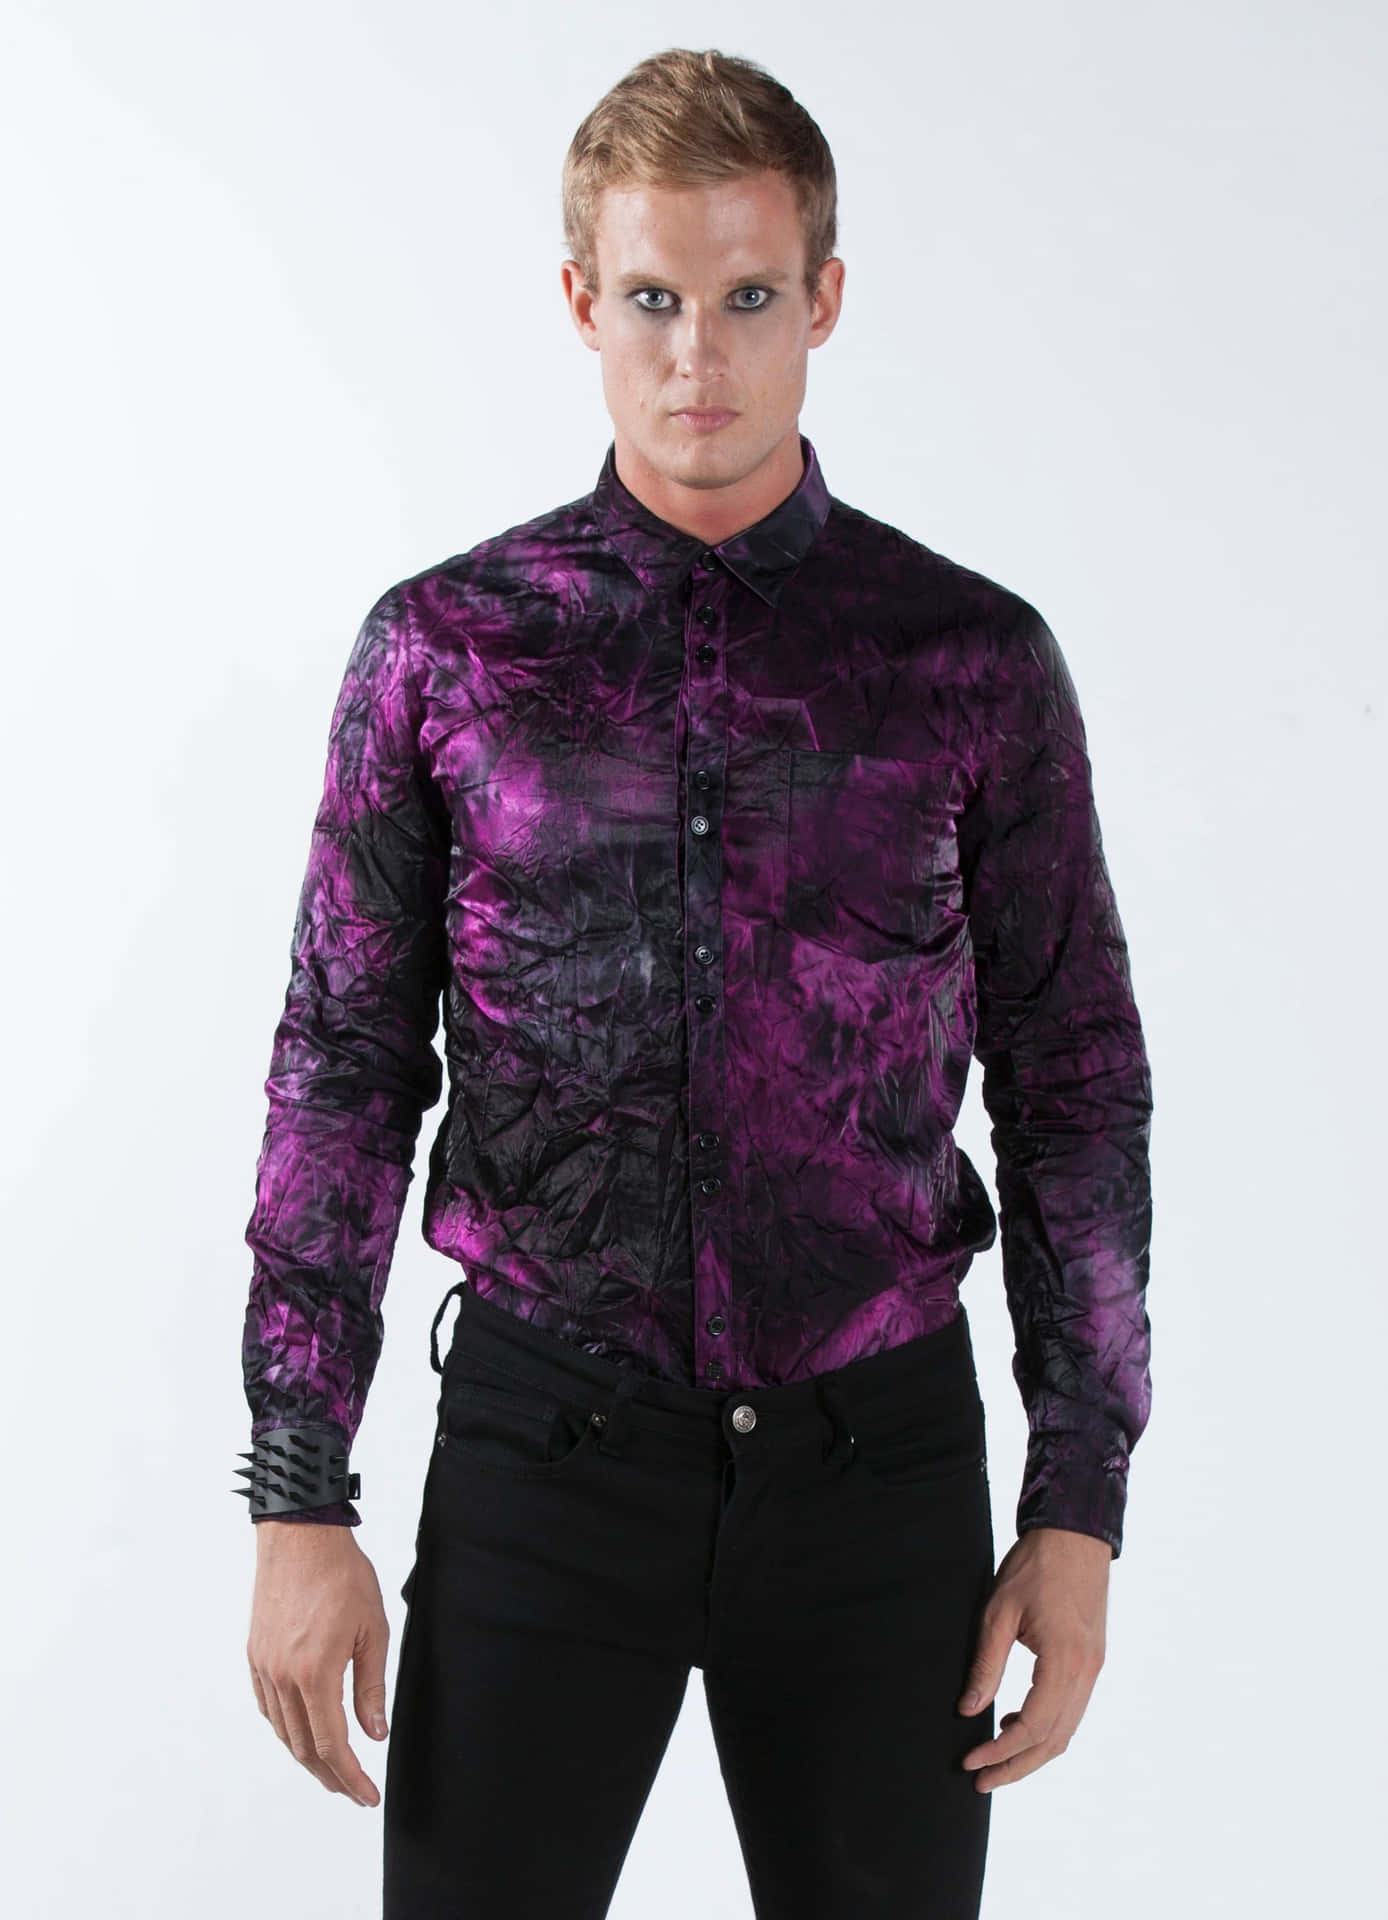 Feed Your Bold Side with a Colorful Purple Shirt" Wallpaper